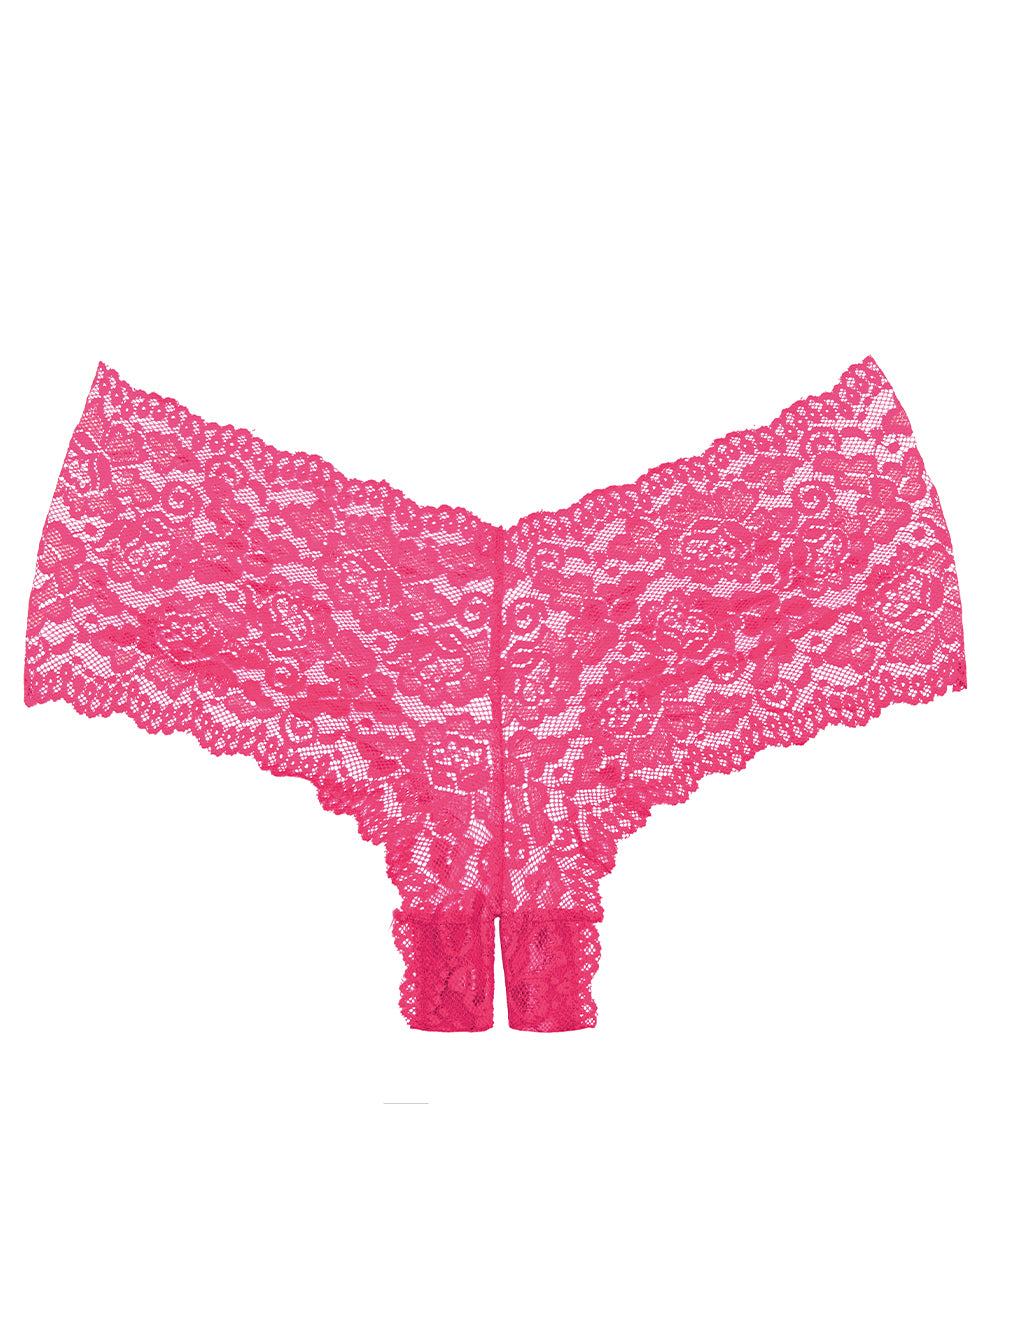 Allure Lingerie Crotchless Scallop Lace Boyshort Panty- Hot Pink- Front